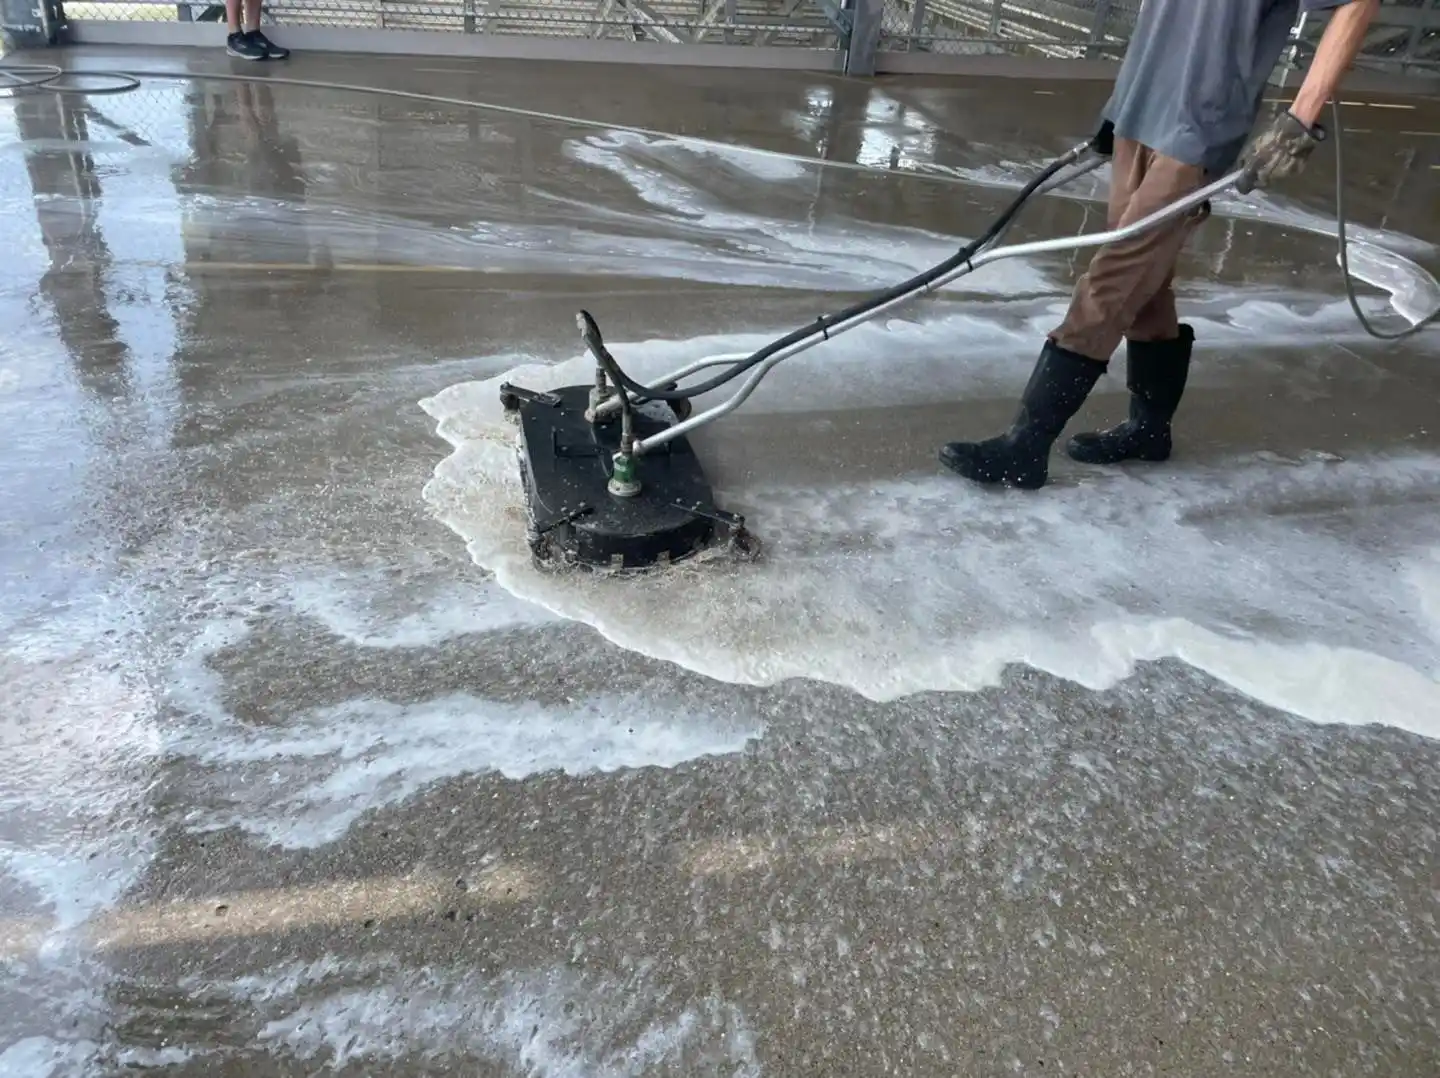 Commercial for Oakland Power Washing in Clarksville, TN